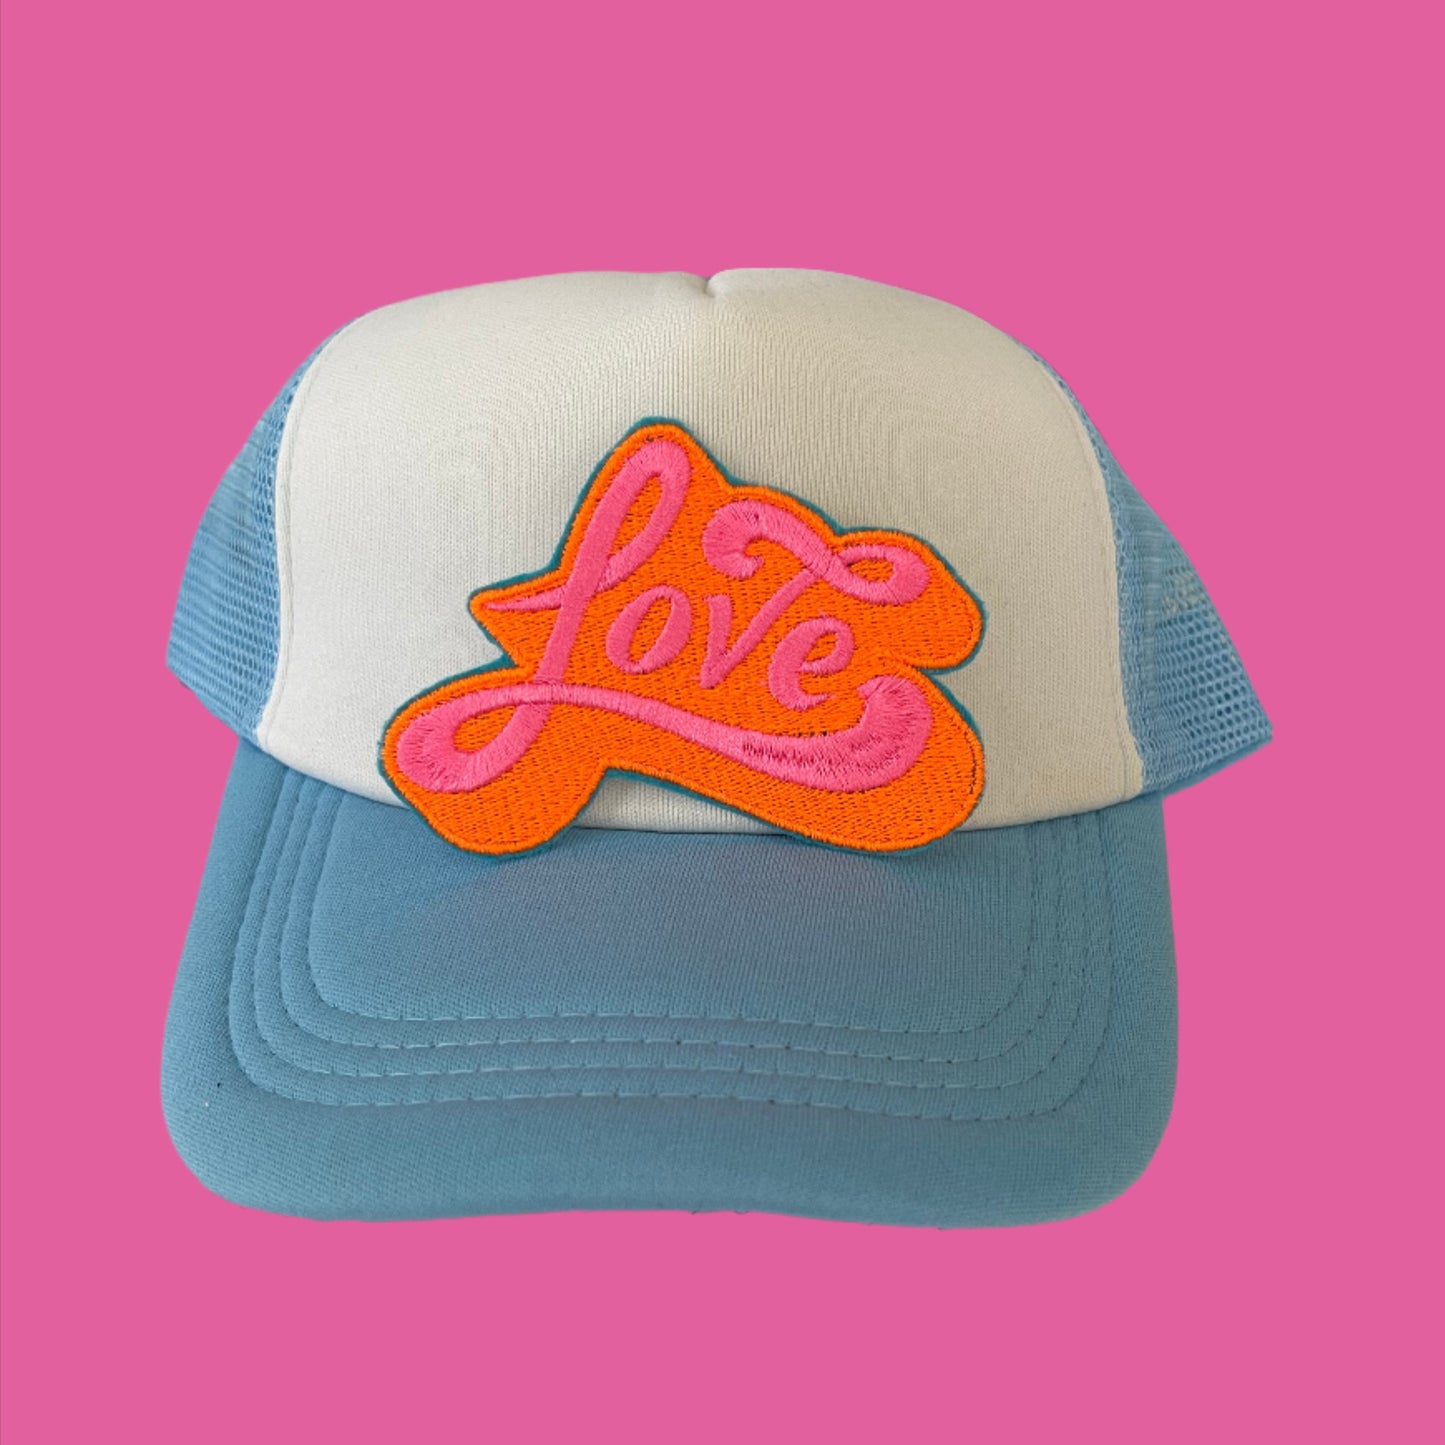 Iron-on patch featuring the word "Love" in vibrant, swirling neon pink letters against a bold orange background with an aqua outline.